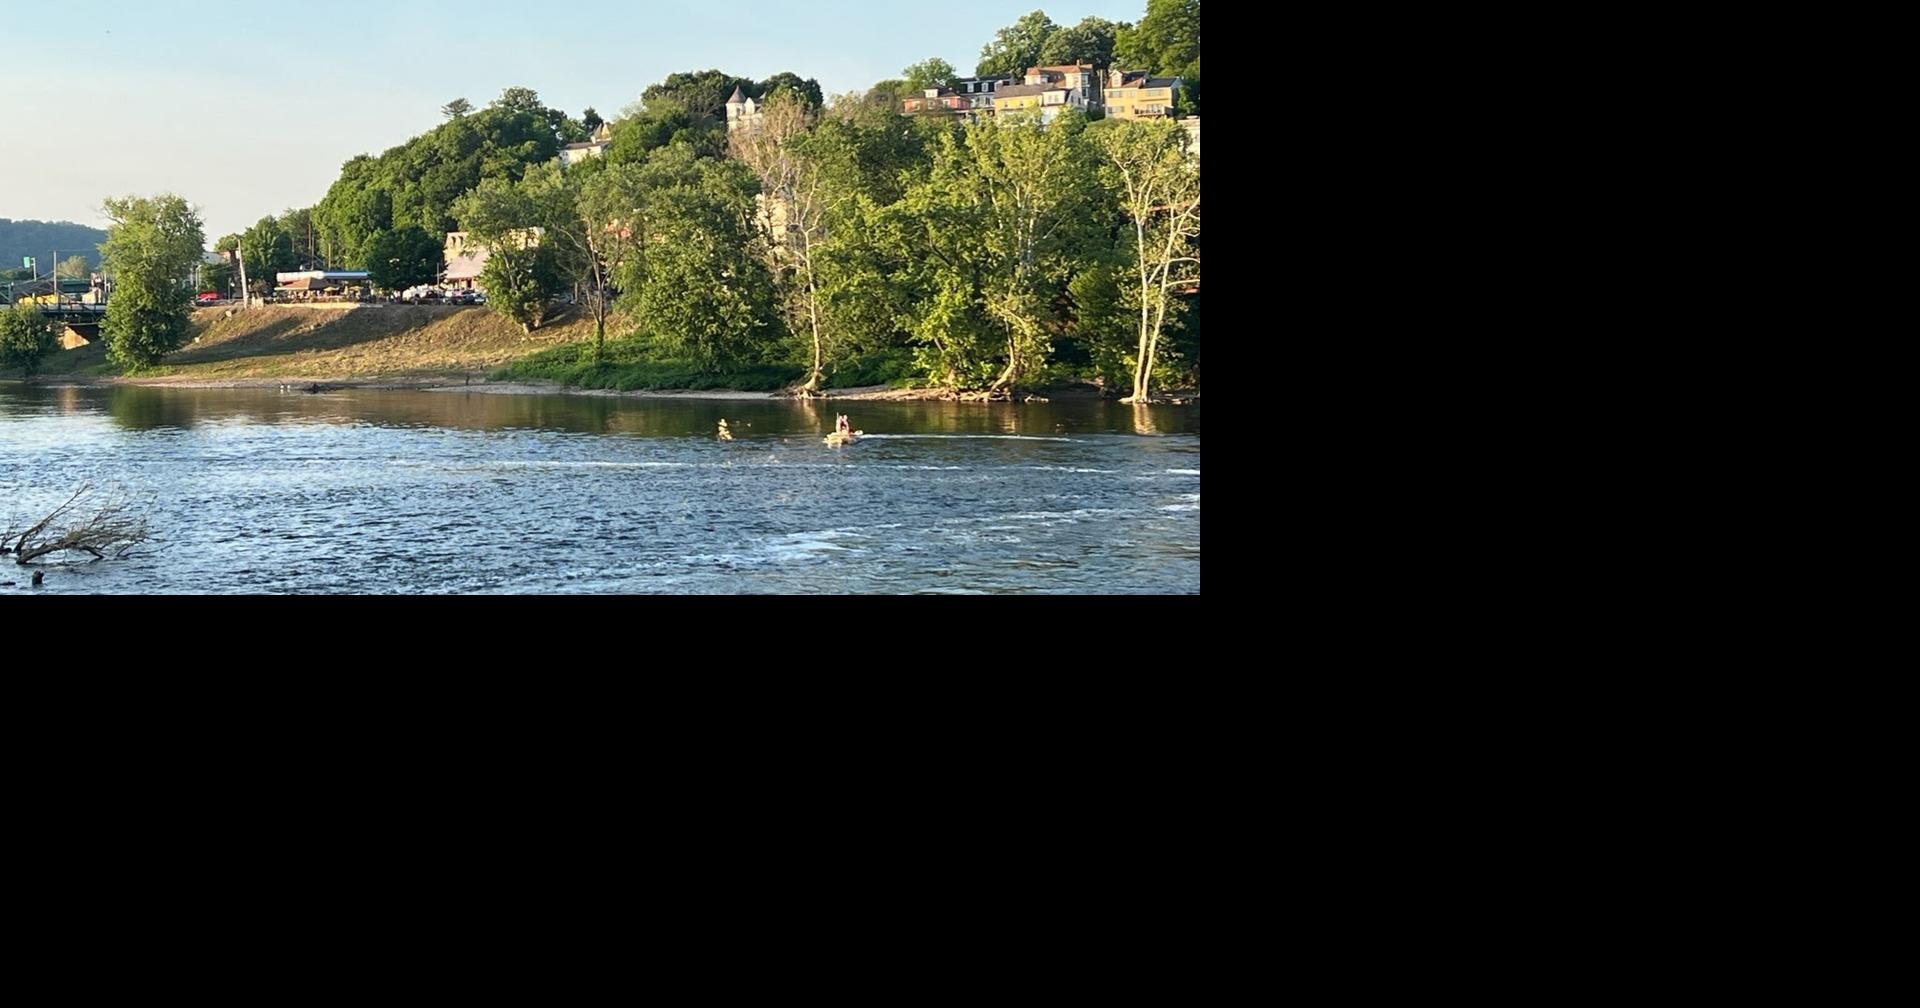 Crews sent to reported water rescue incident in Delaware River